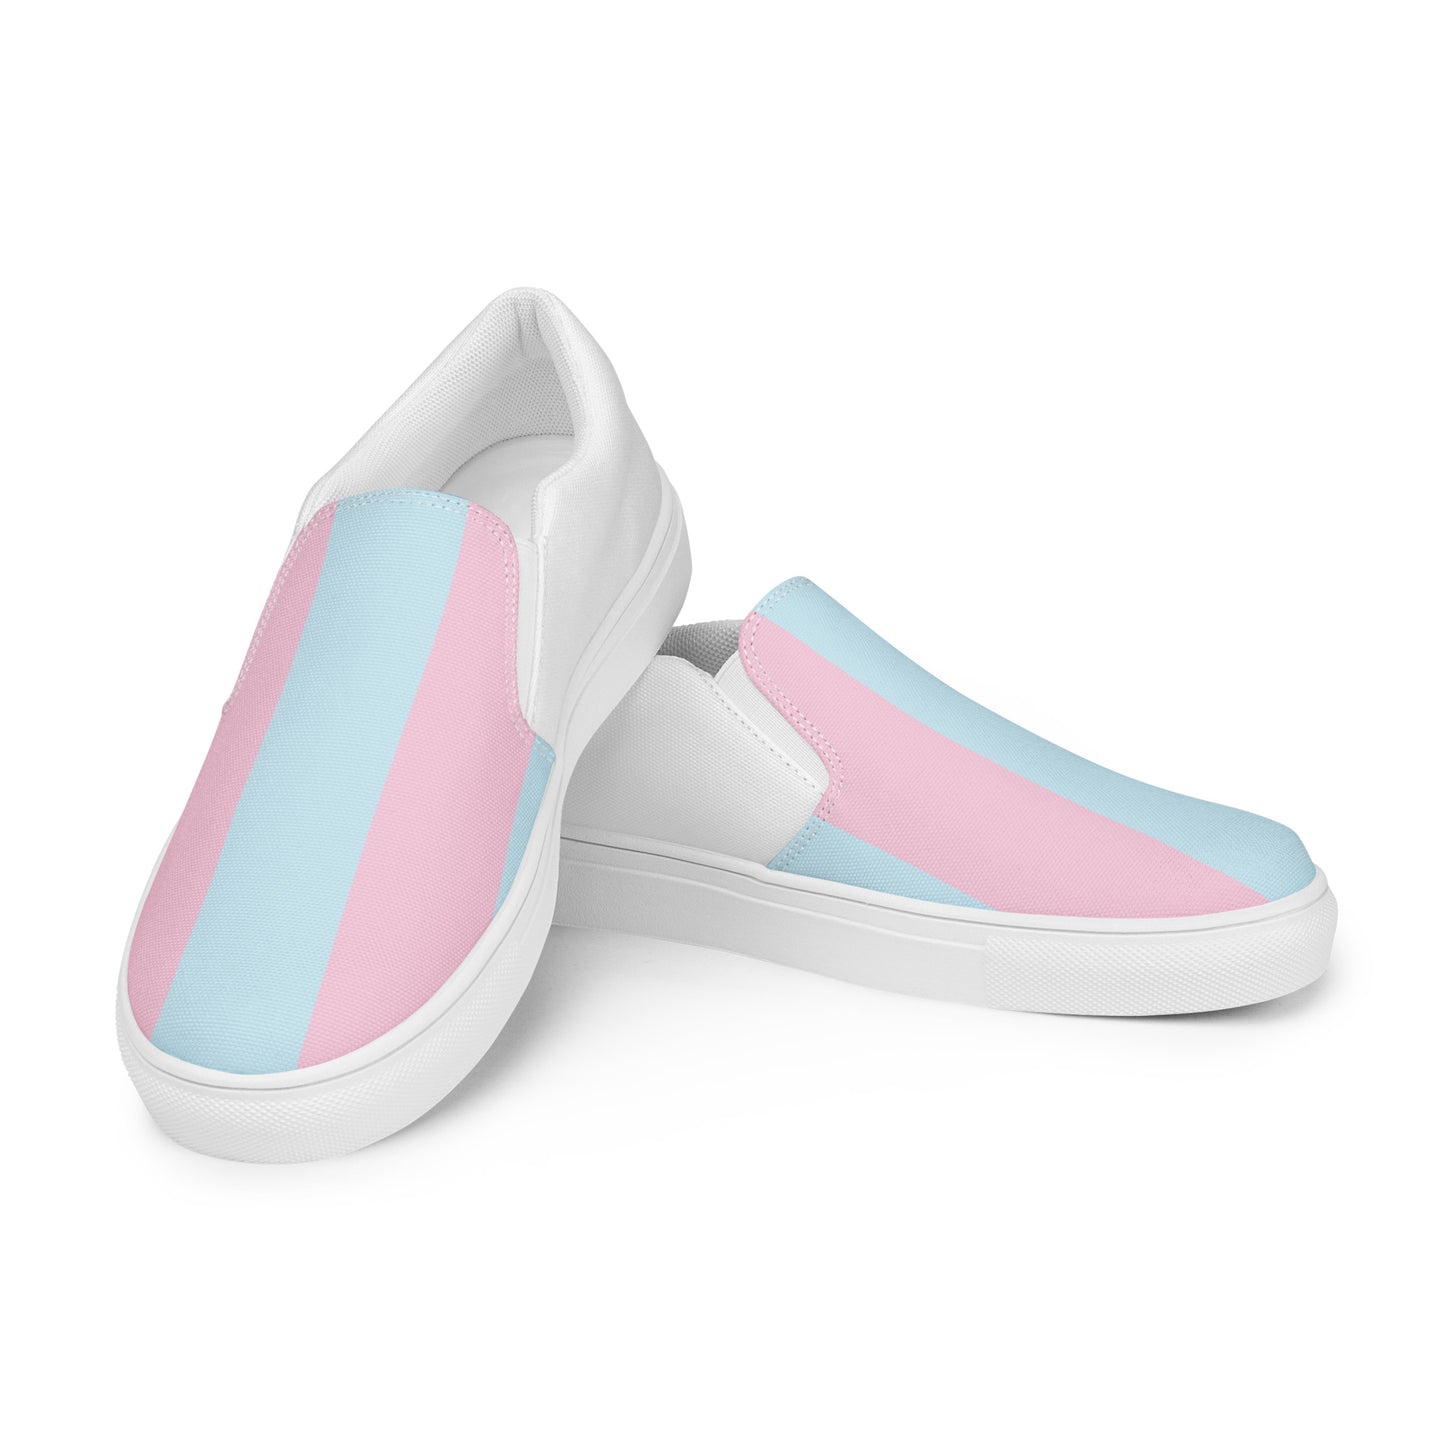 Cool Pastel - Sustainably Made Men's Slip-On Canvas Shoes